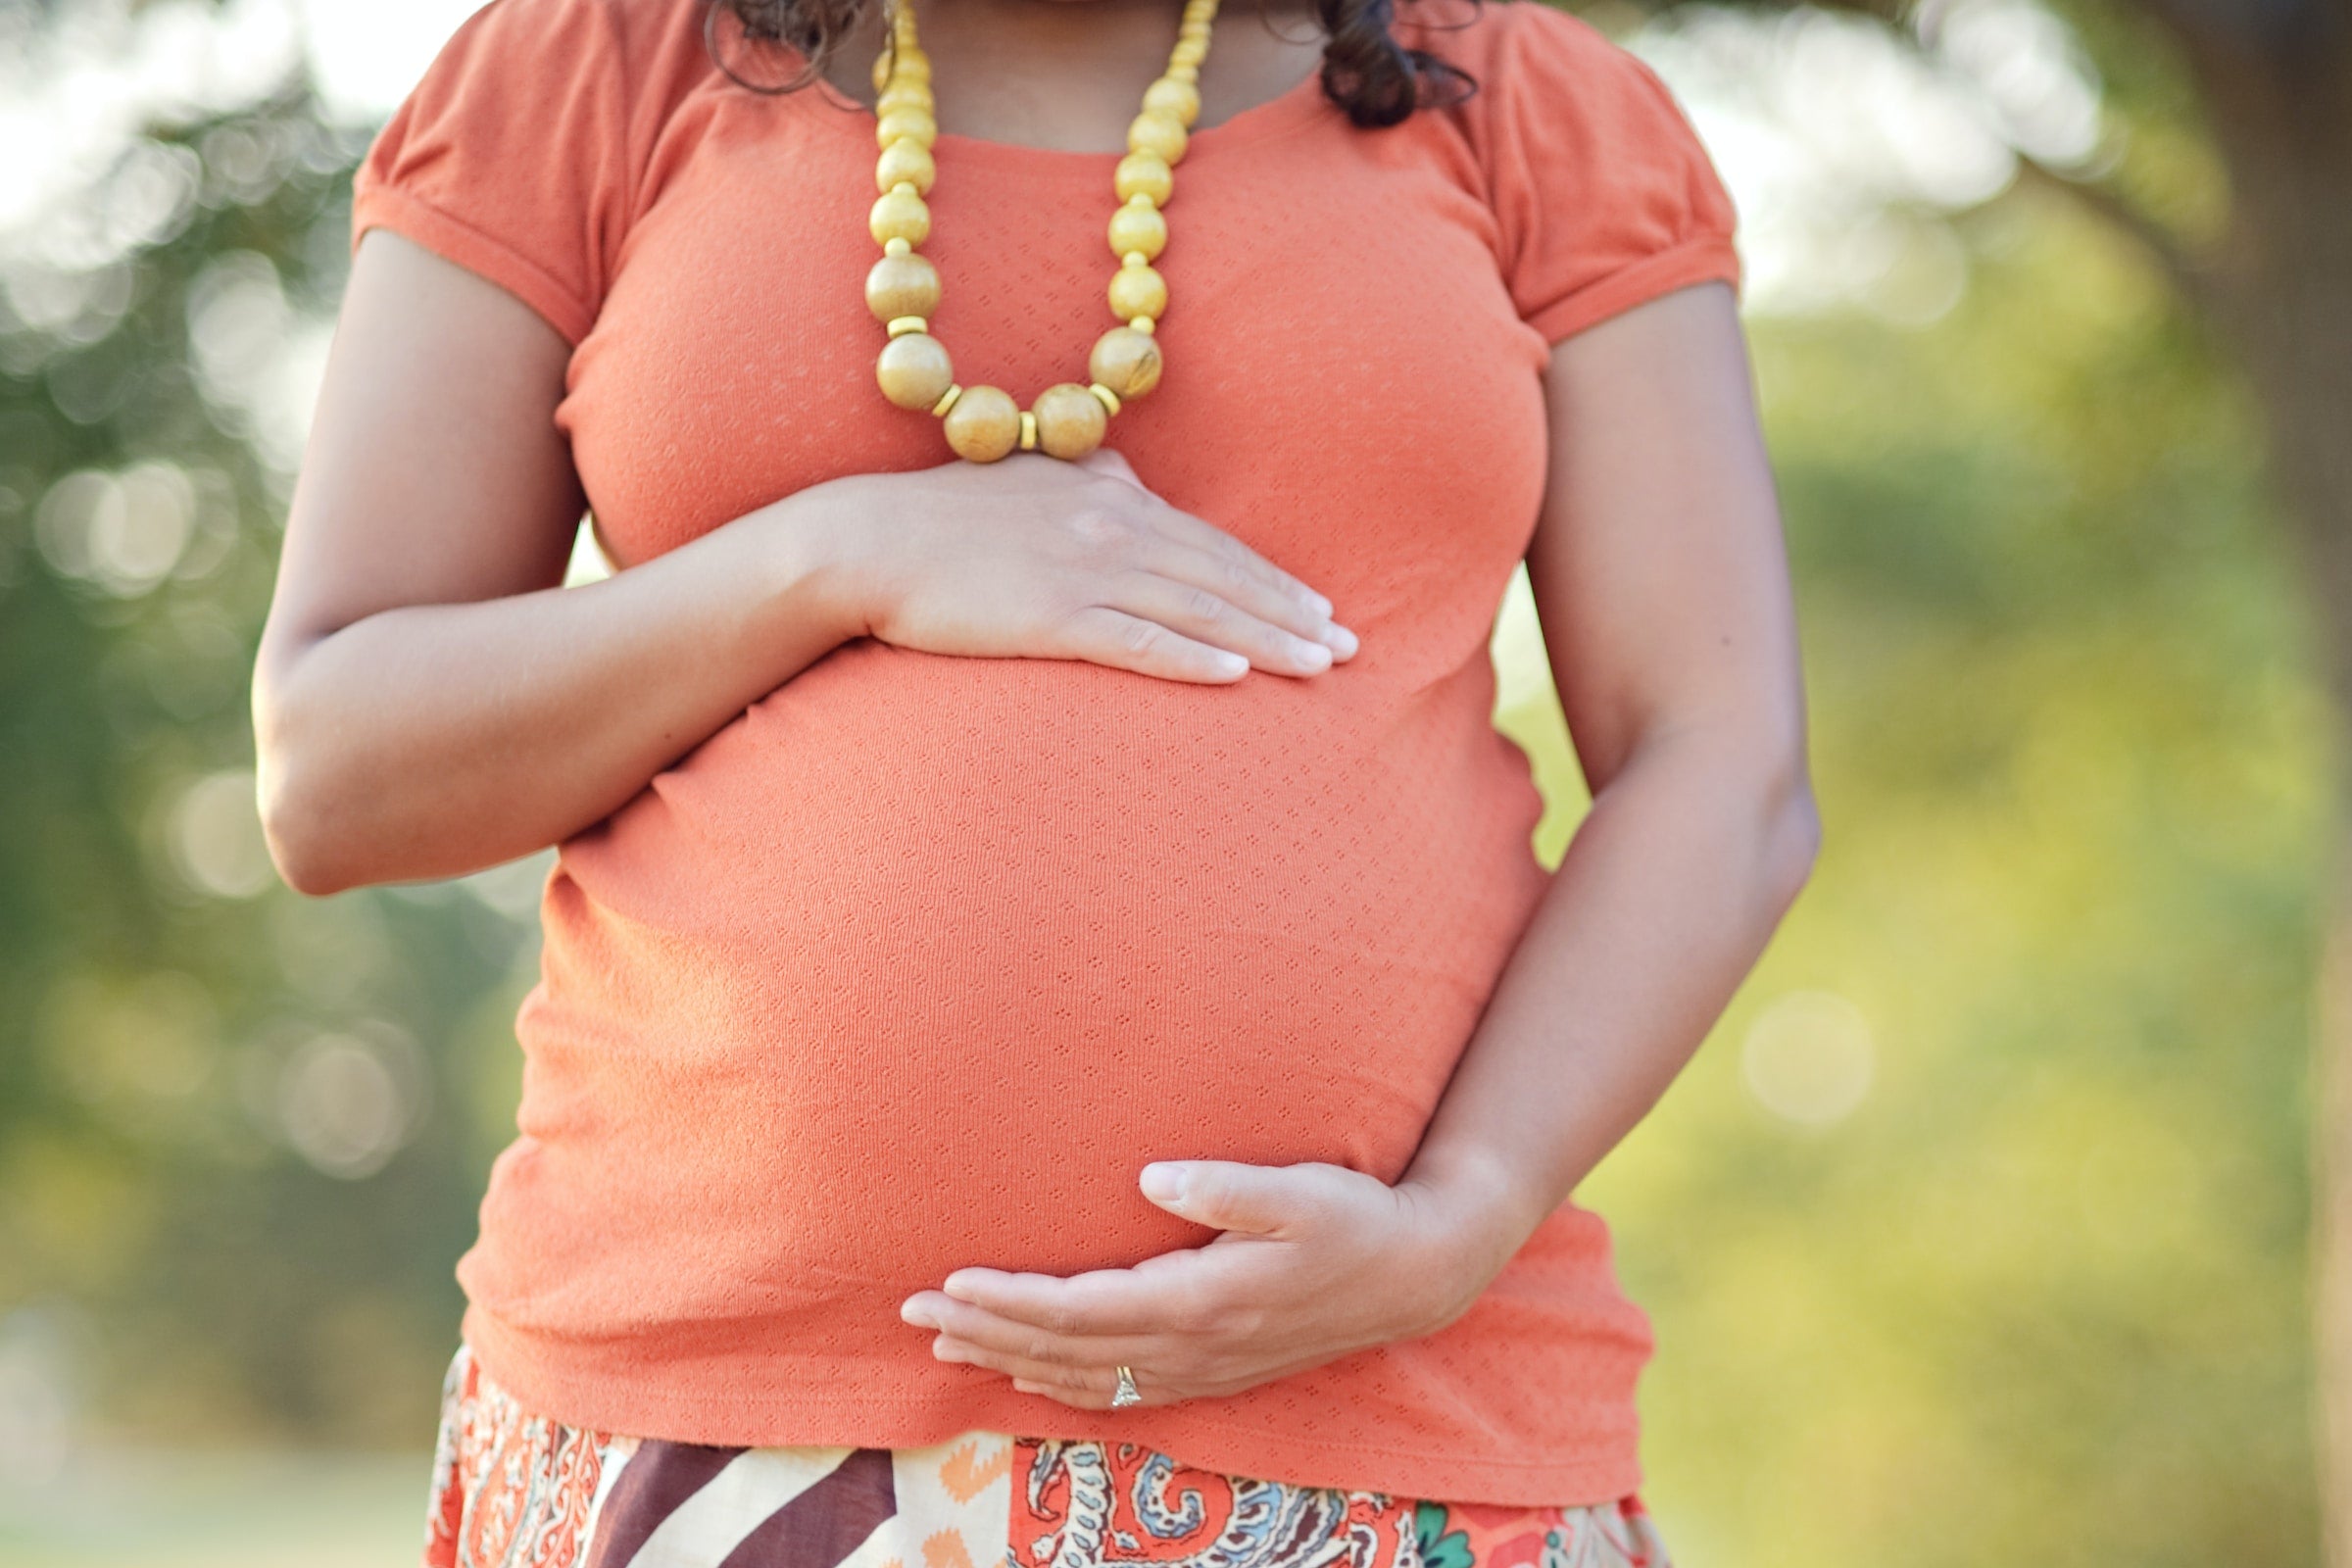 Pregnant woman holding belly outside